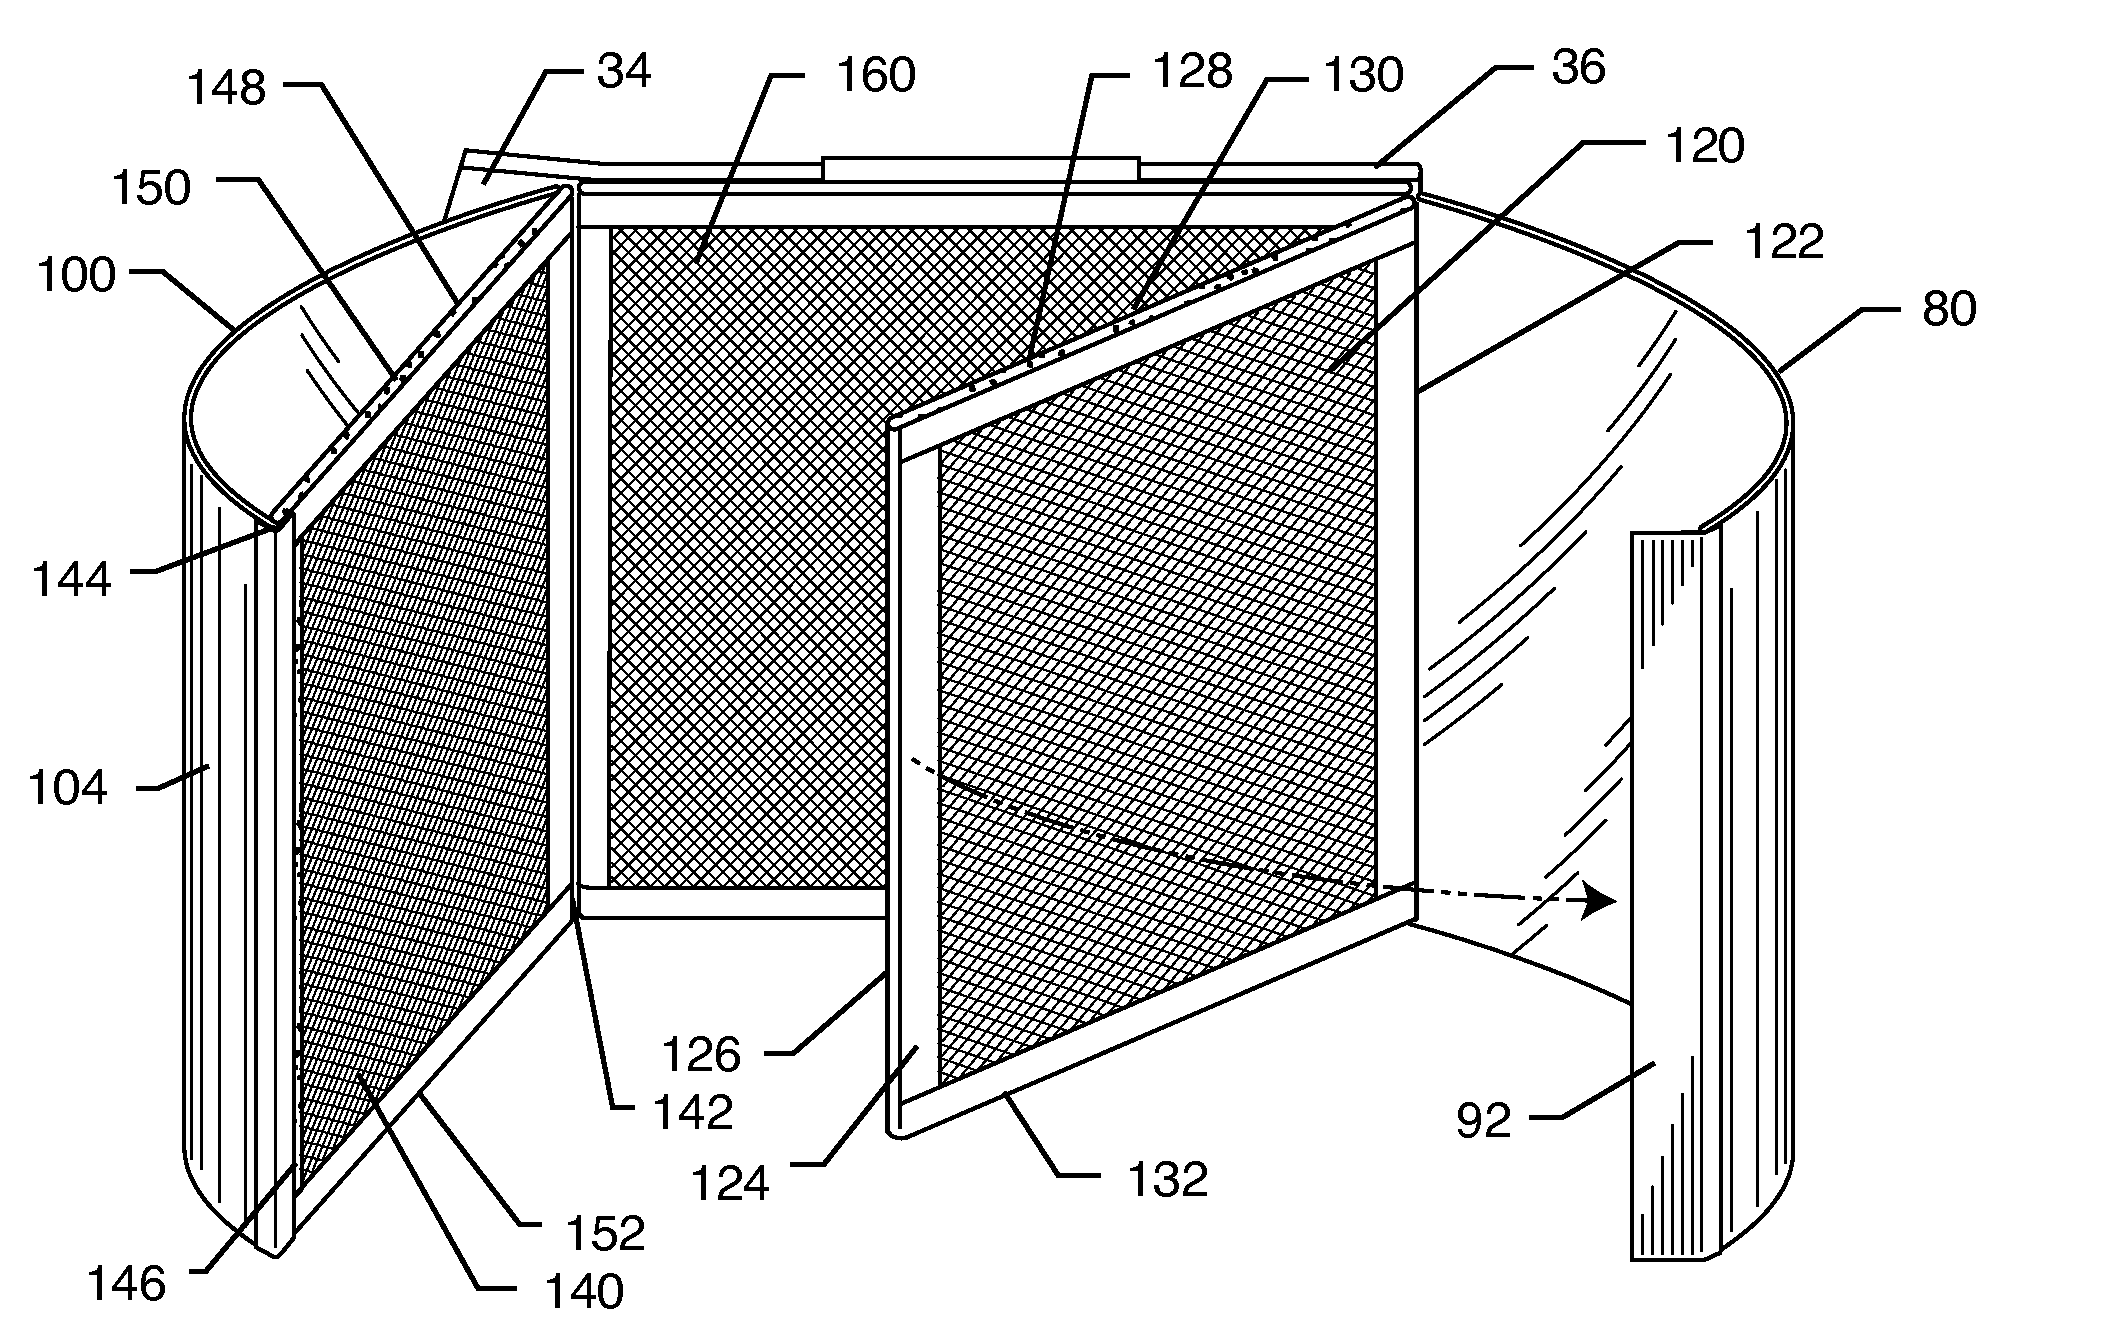 Portable photography studio and method of assembly